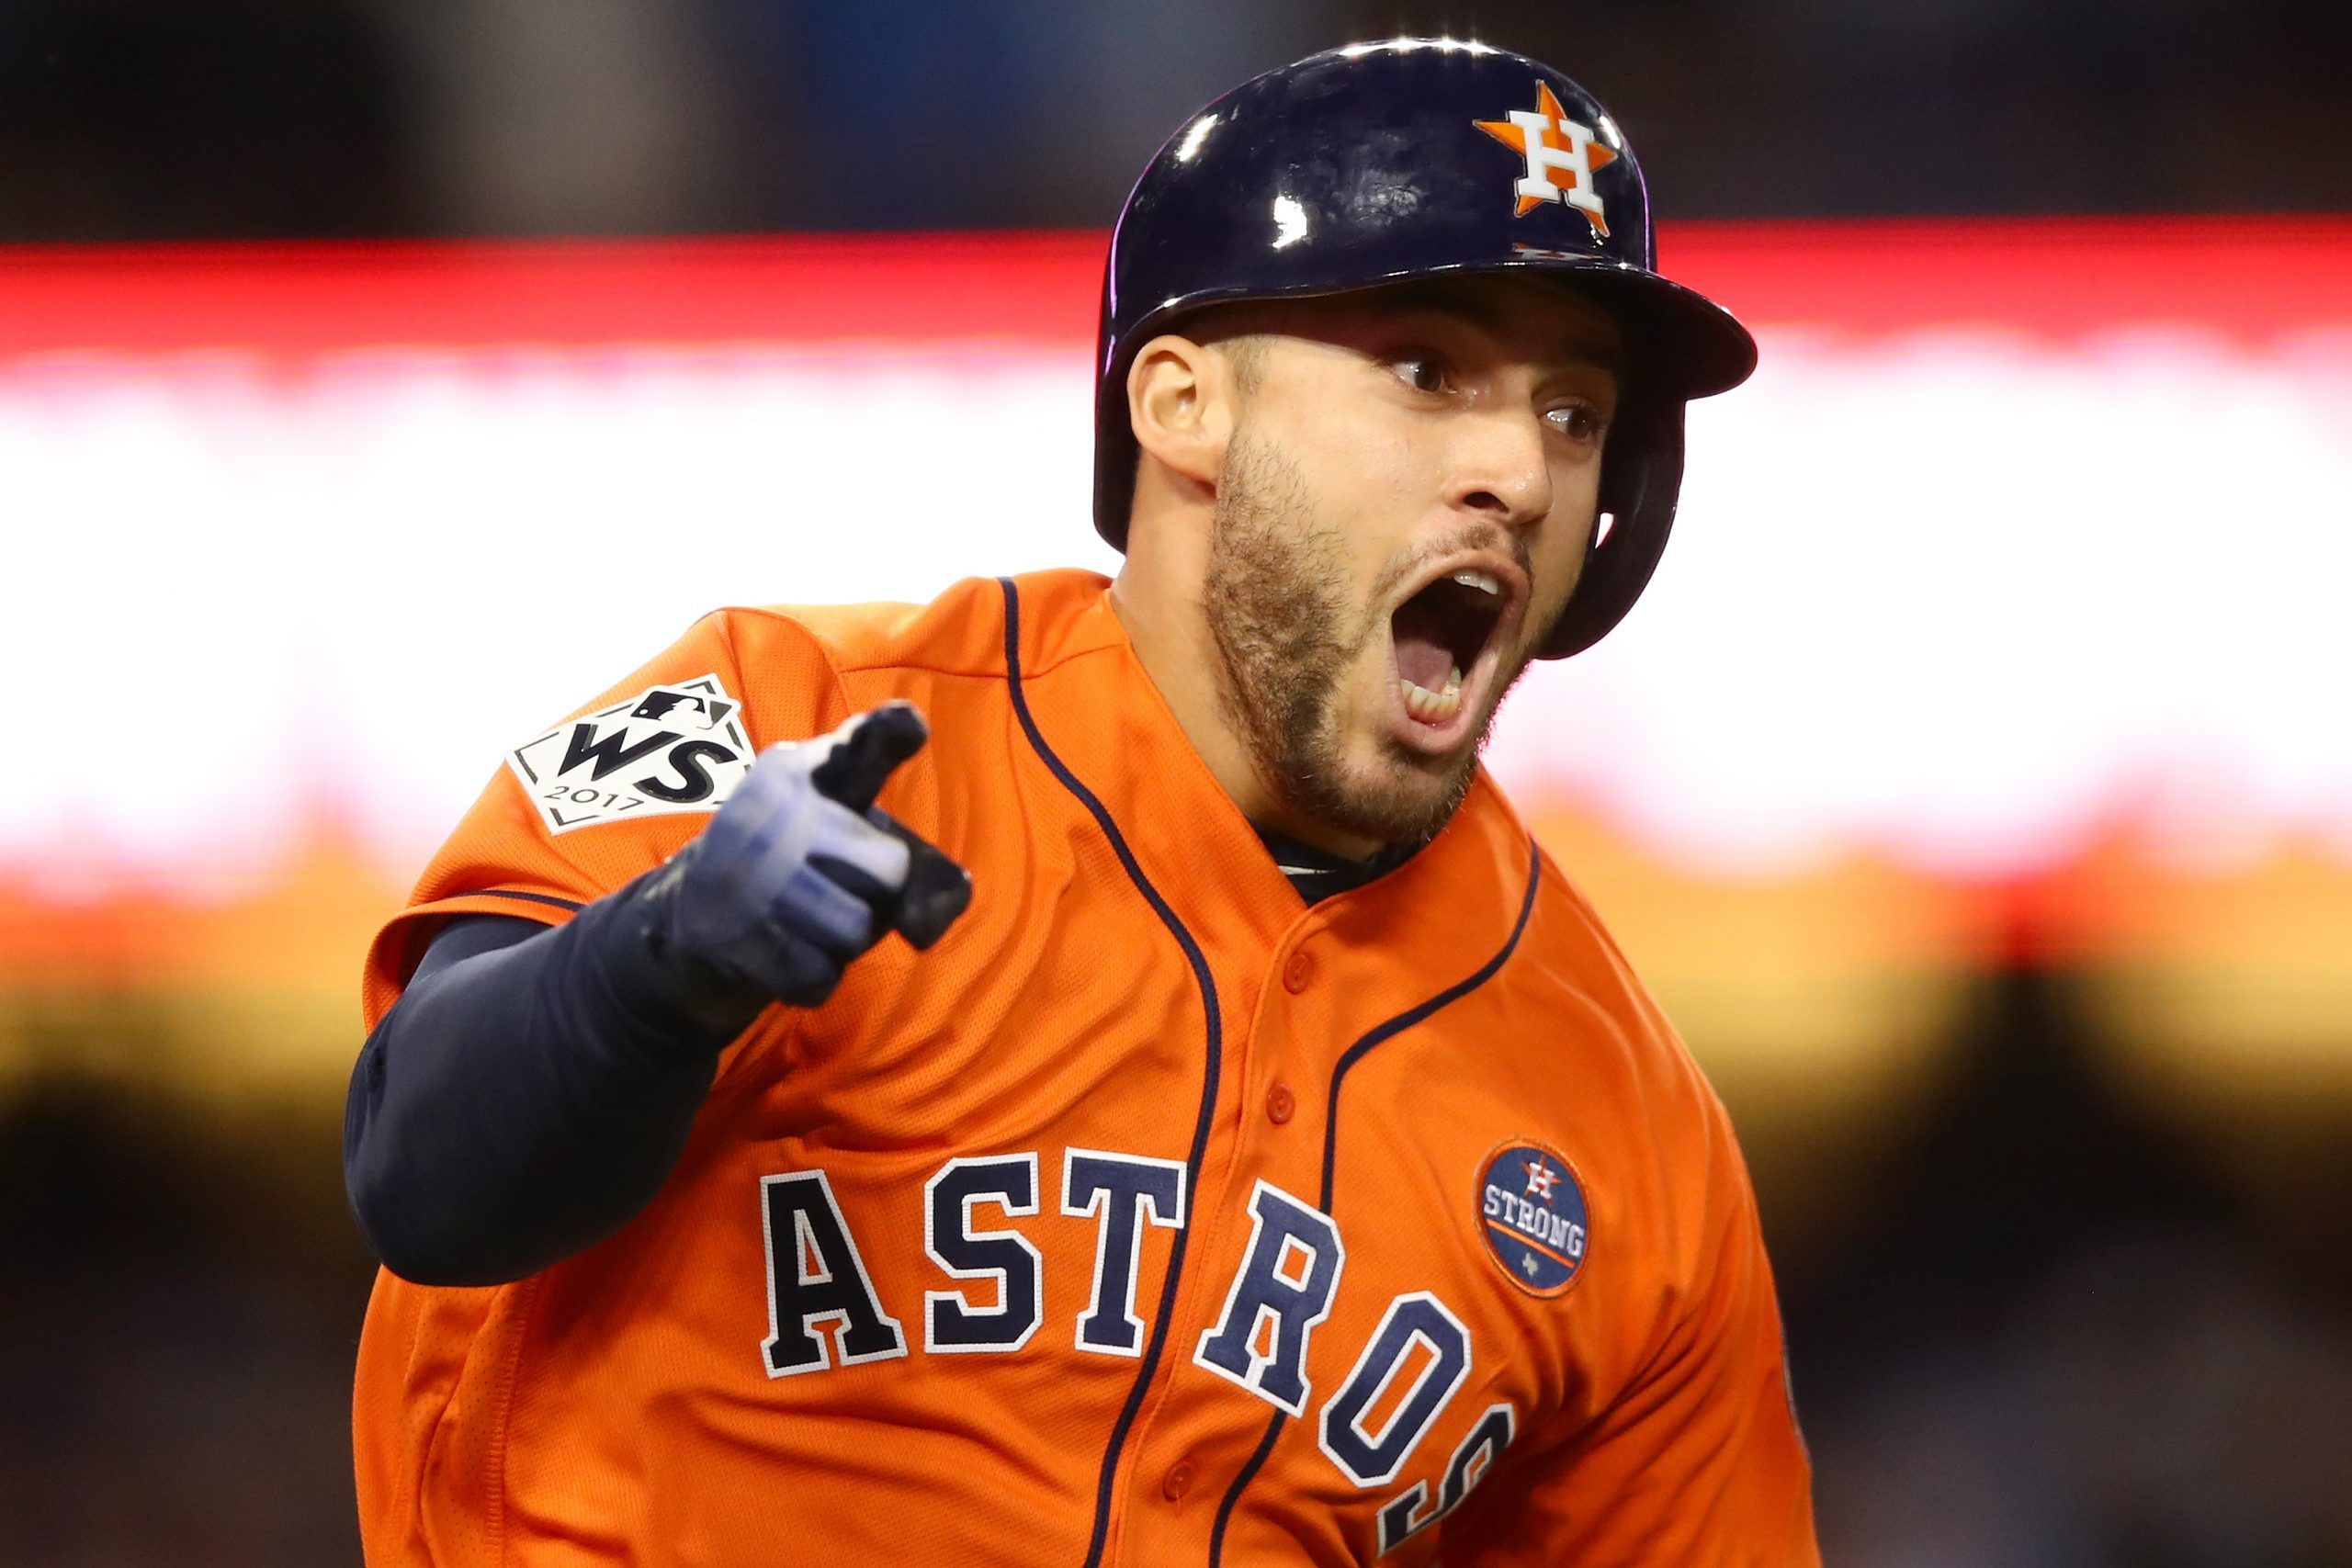 Blue Jays' George Springer gets real about hostile Yankees fans in big win  in the Bronx